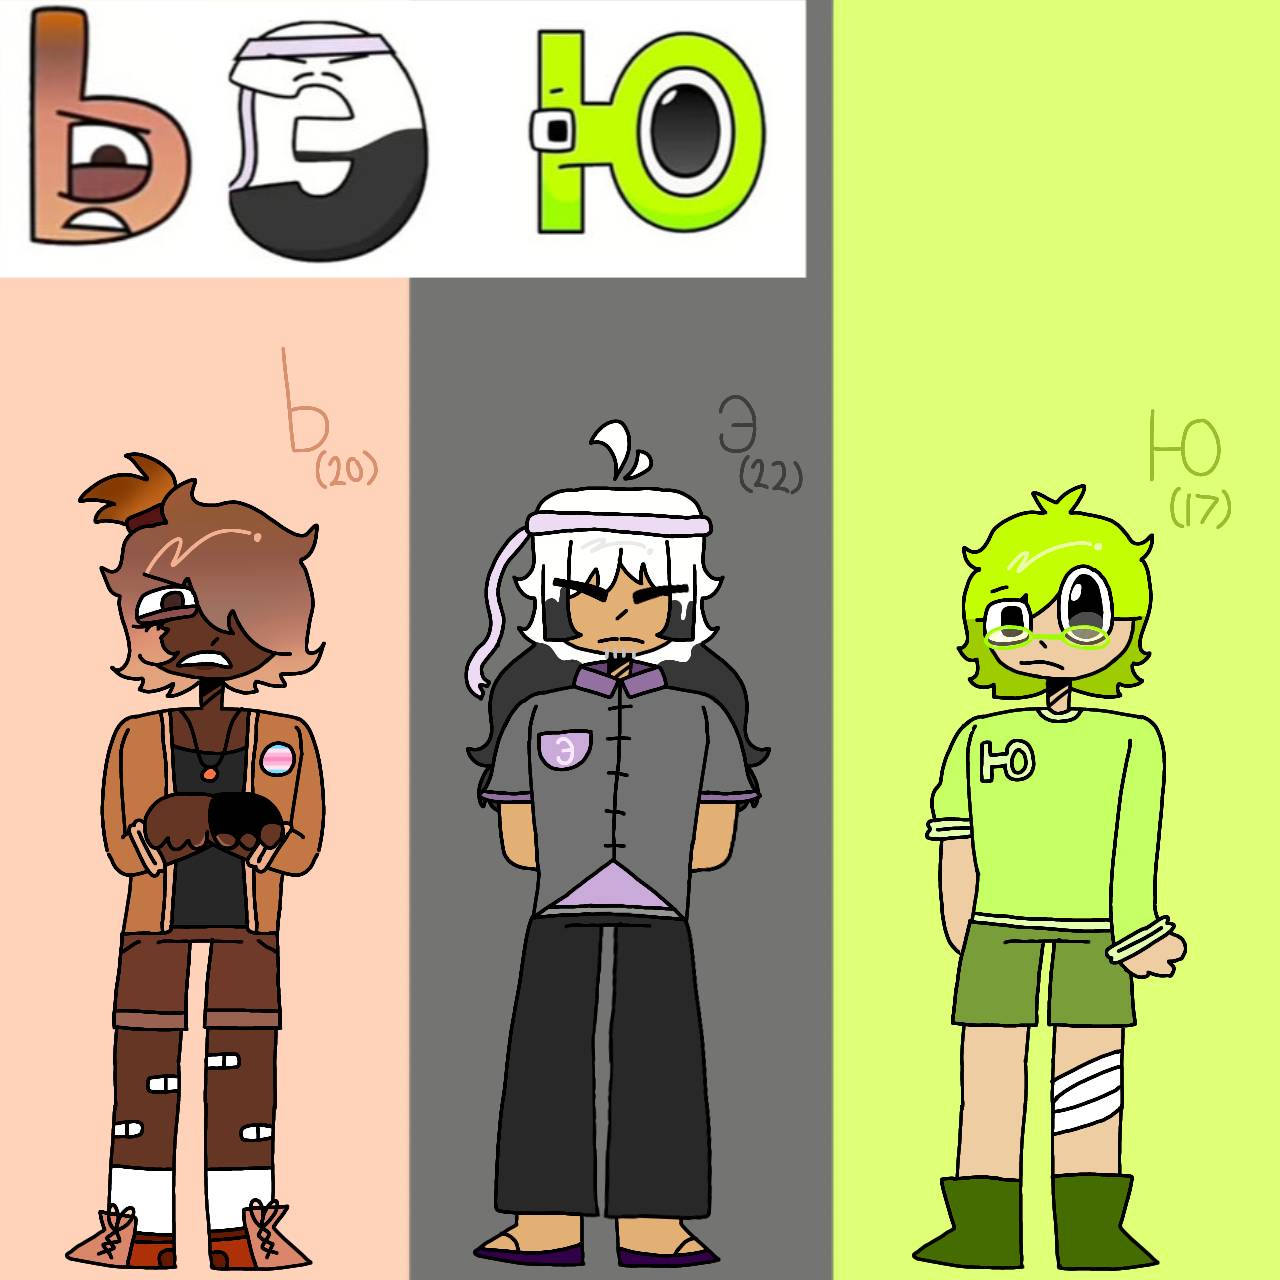 Russian Alphabet Lore Characters Part 1 by che1211095 on DeviantArt